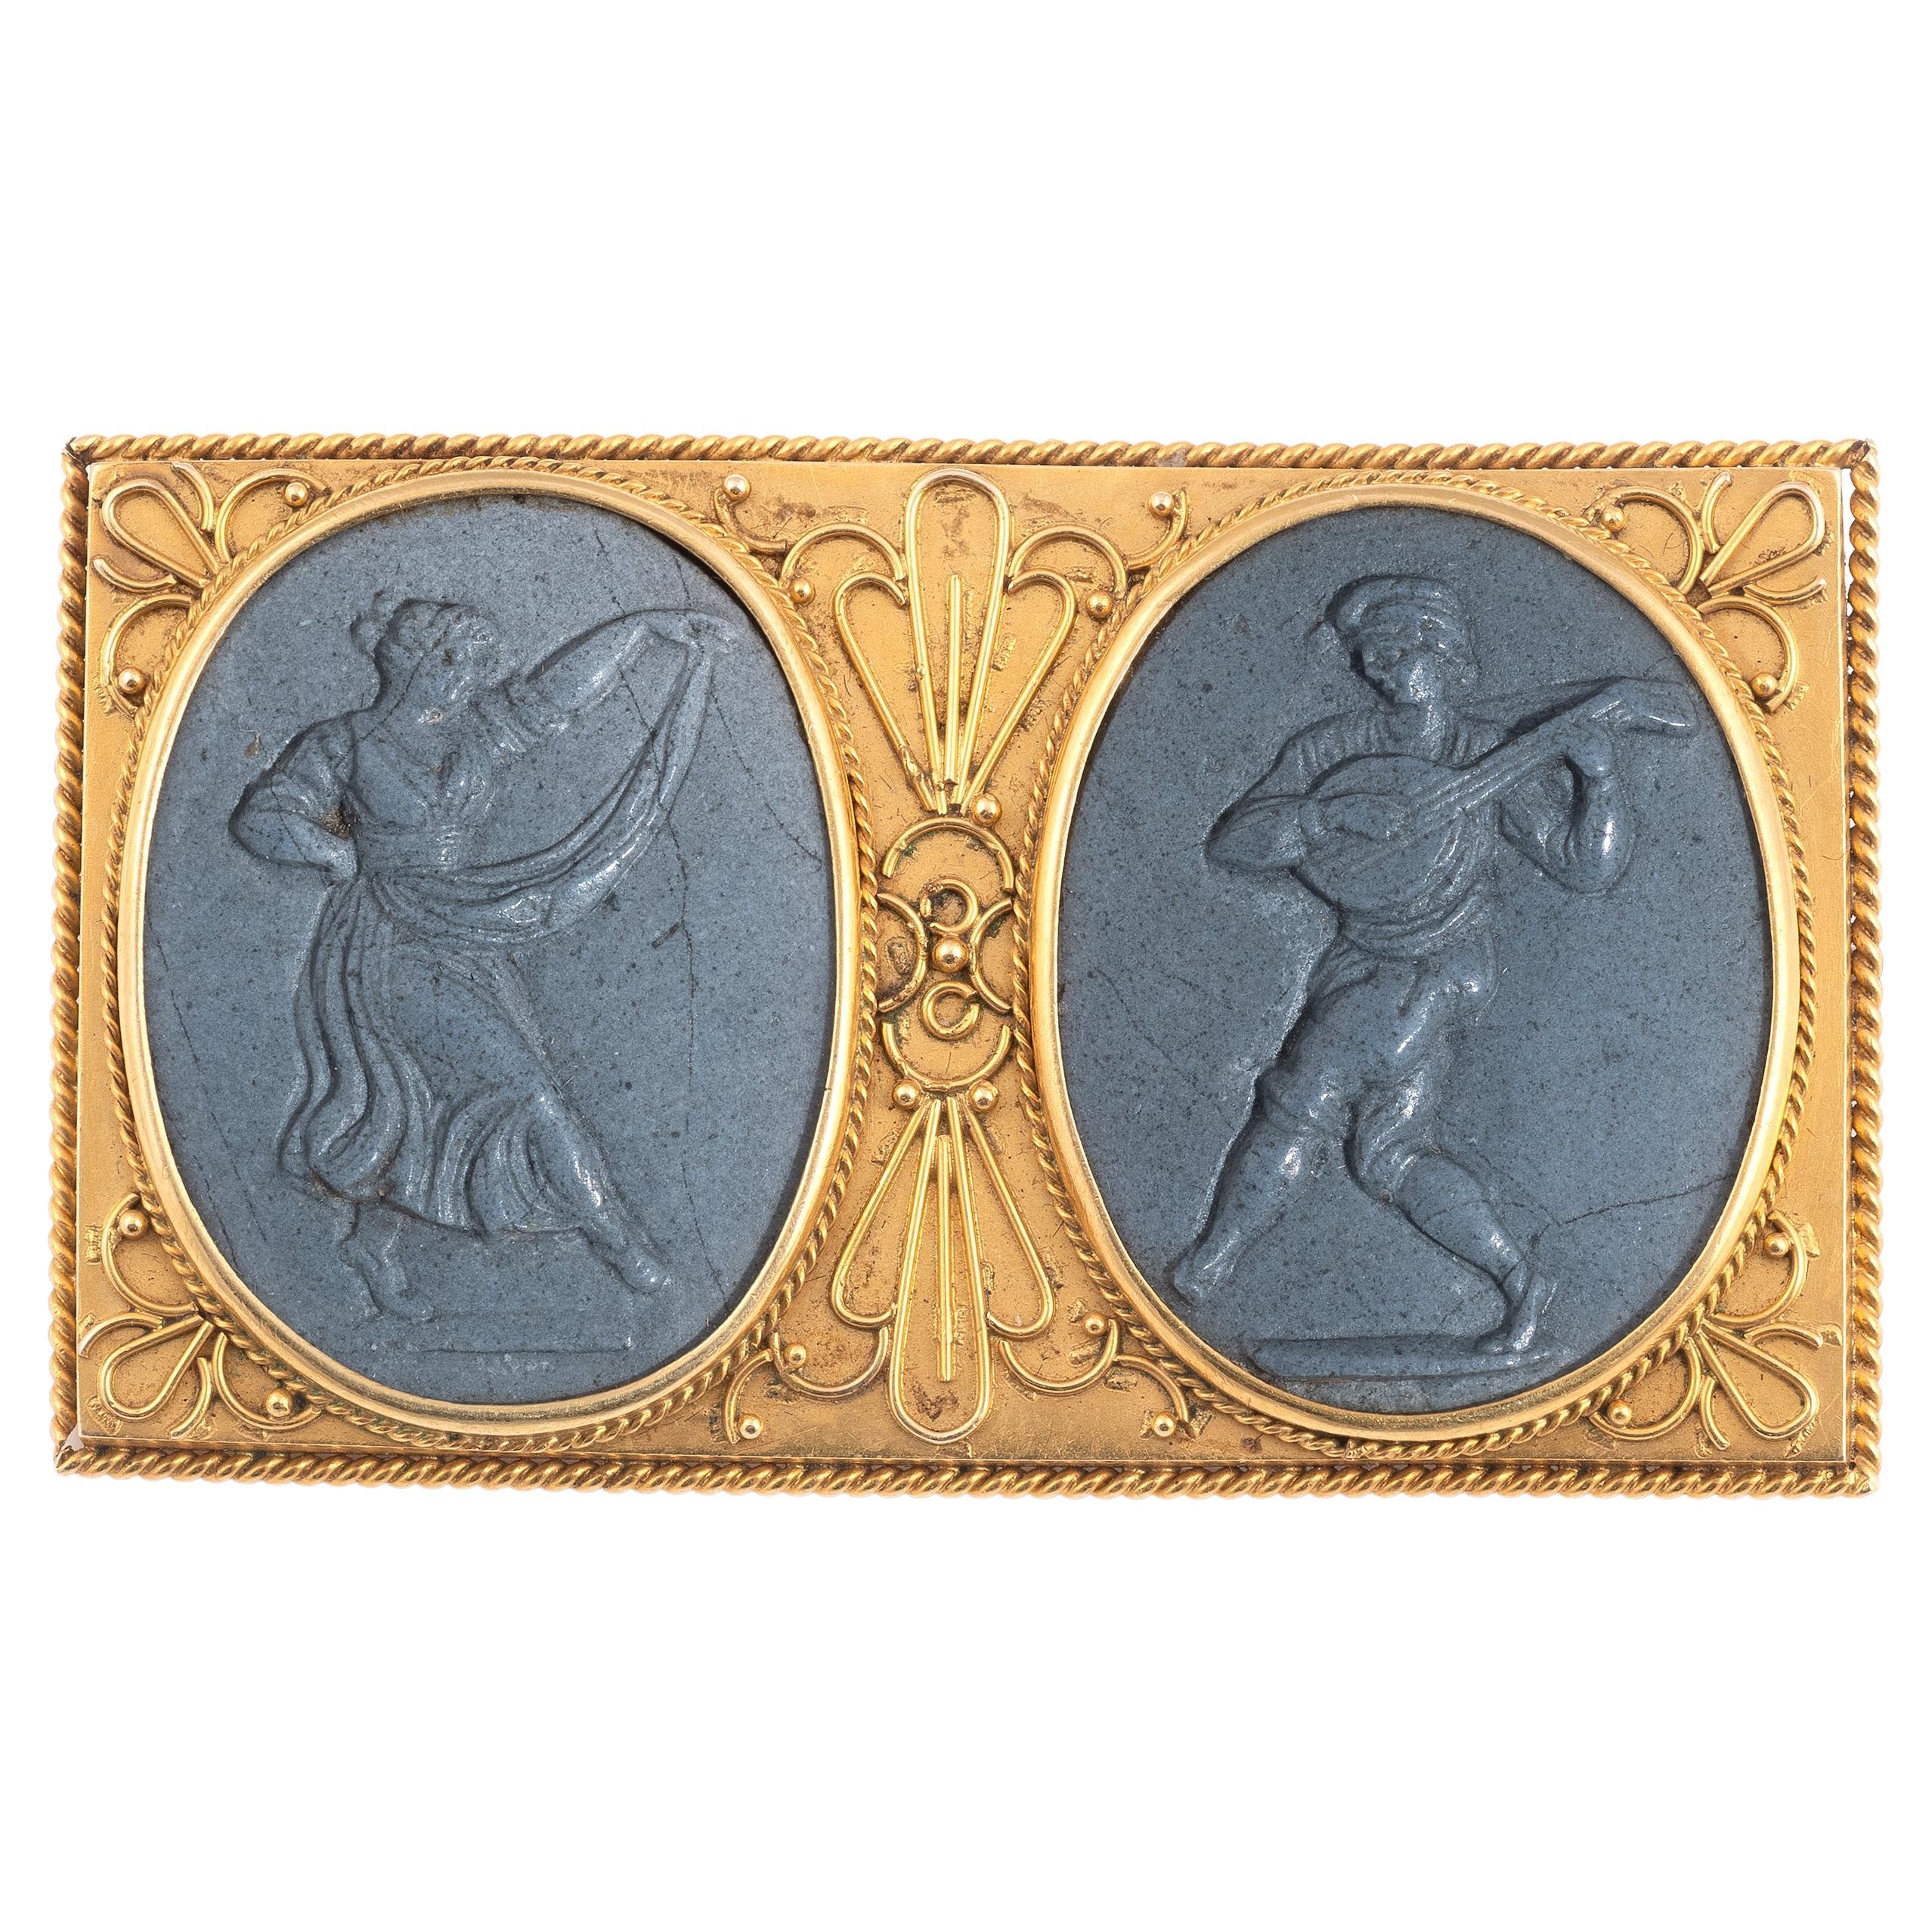 Archaeological Revival Gold And Lava Cameo Brooch Late 19th Century In Excellent Condition For Sale In Firenze, IT